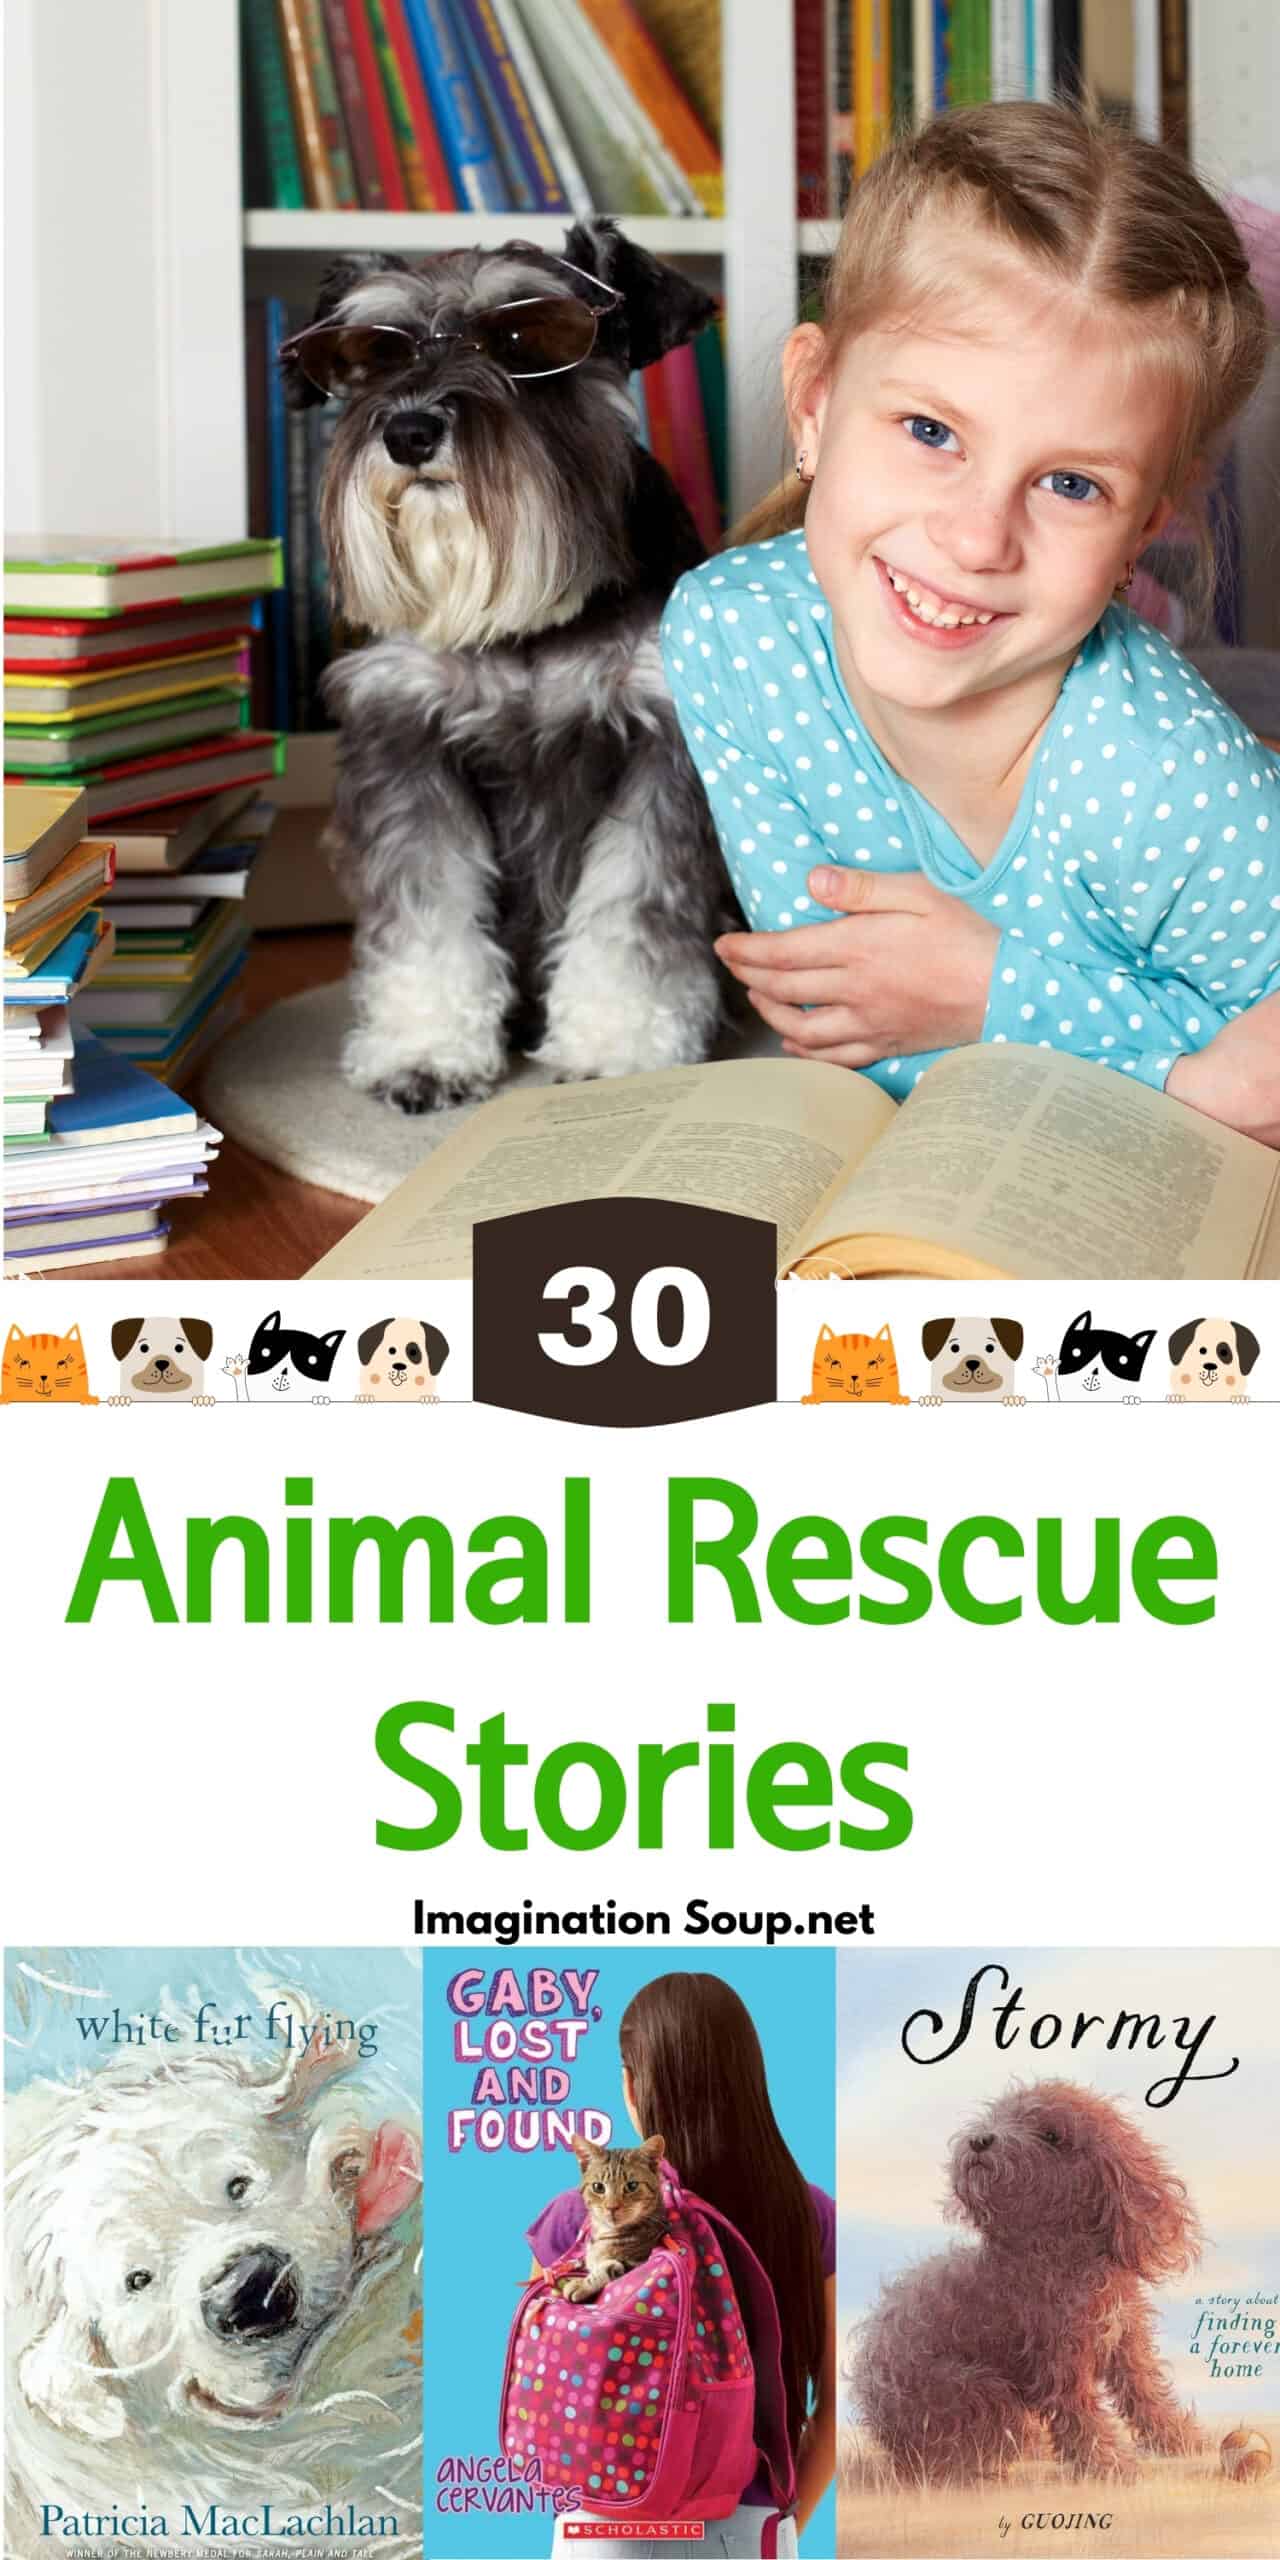 Animal Rescue Stories for Kids